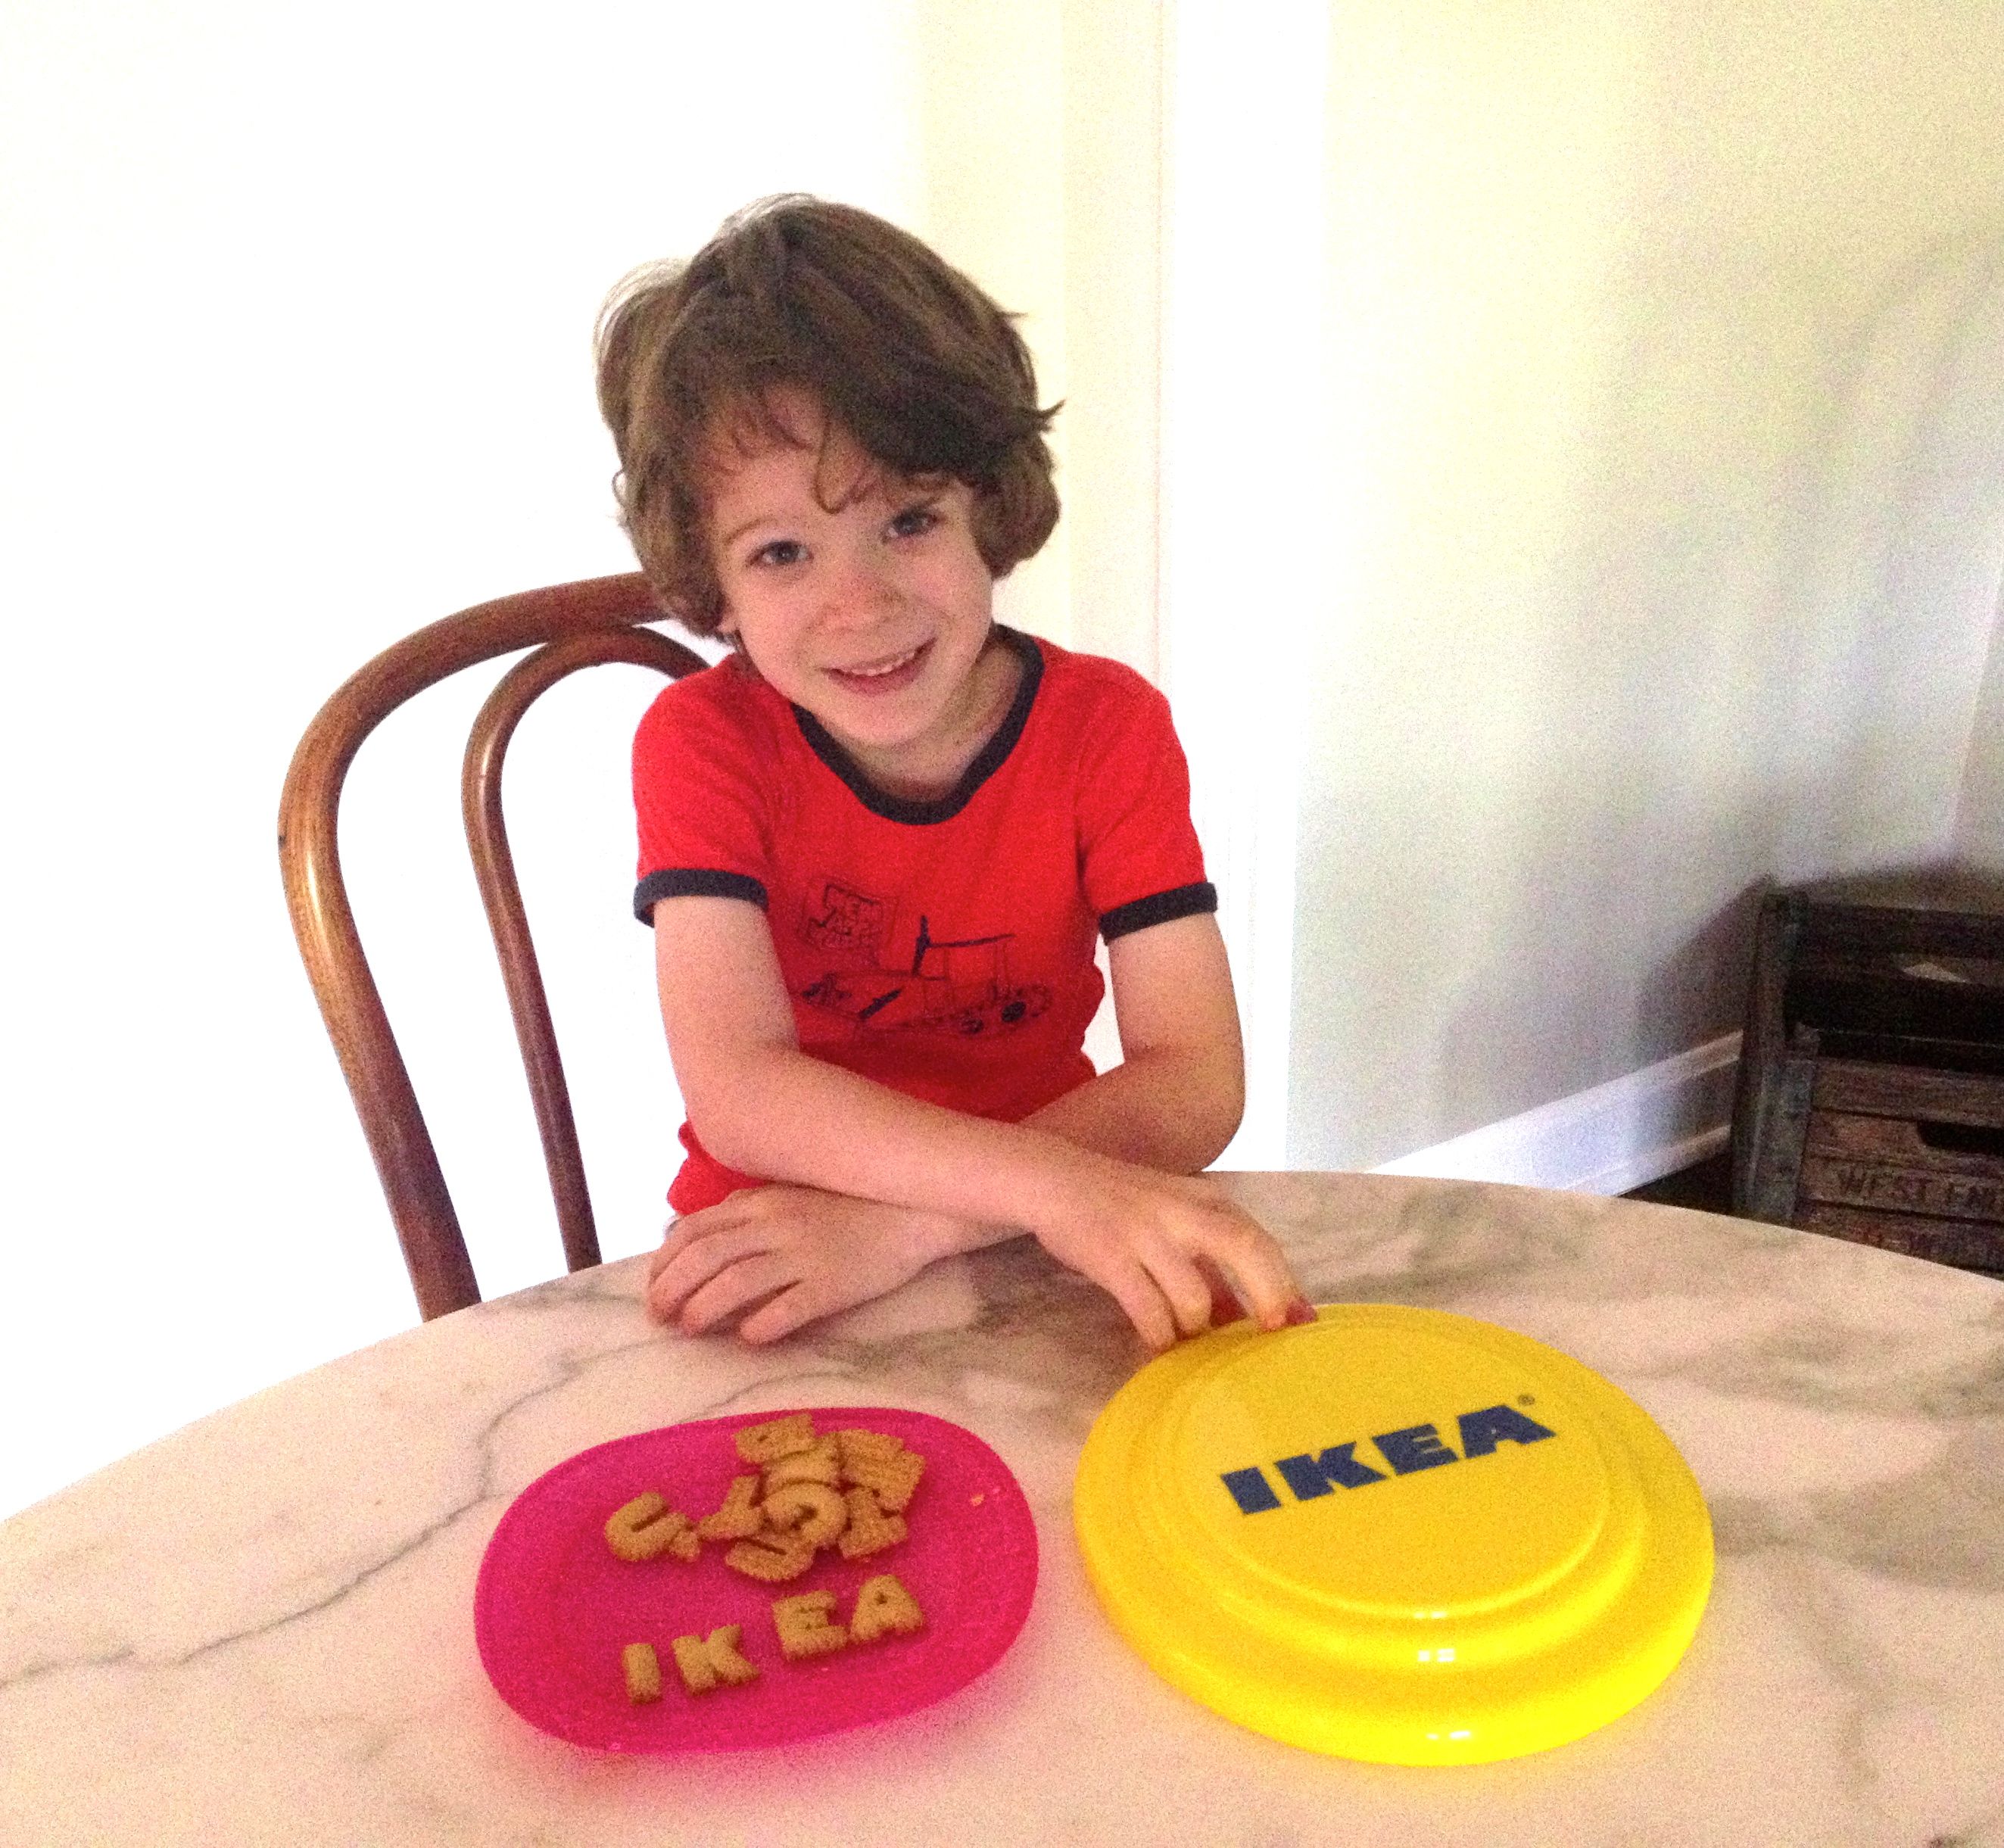 IKEA Orlando Makes Living With Children Easy + $100 Gift Card #Giveaway #IKEACataLove